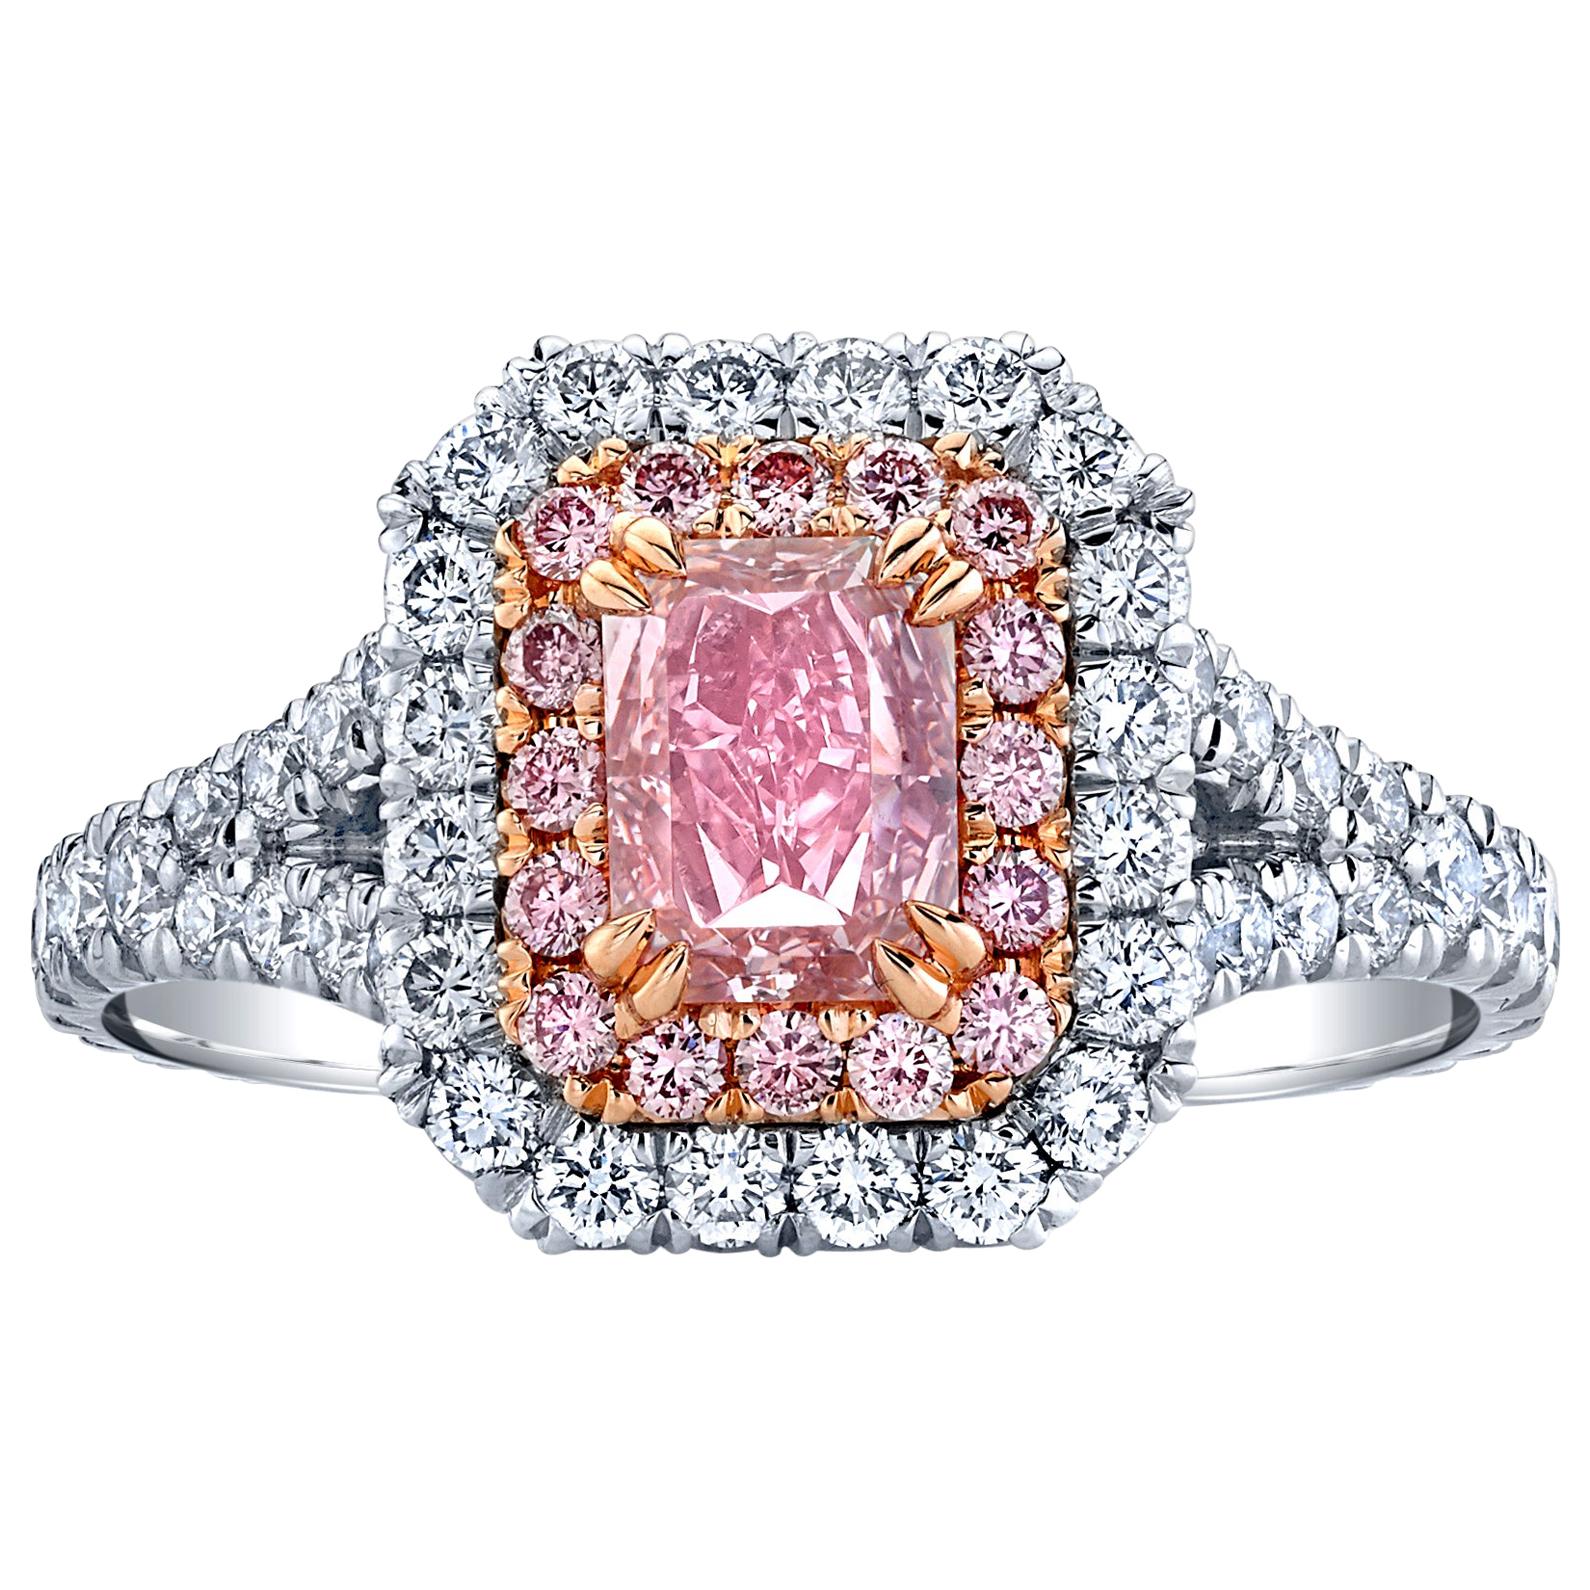 Exceptional GIA Certified Radiant 0.77 Carat Fancy Intense Pink Diamond Ring